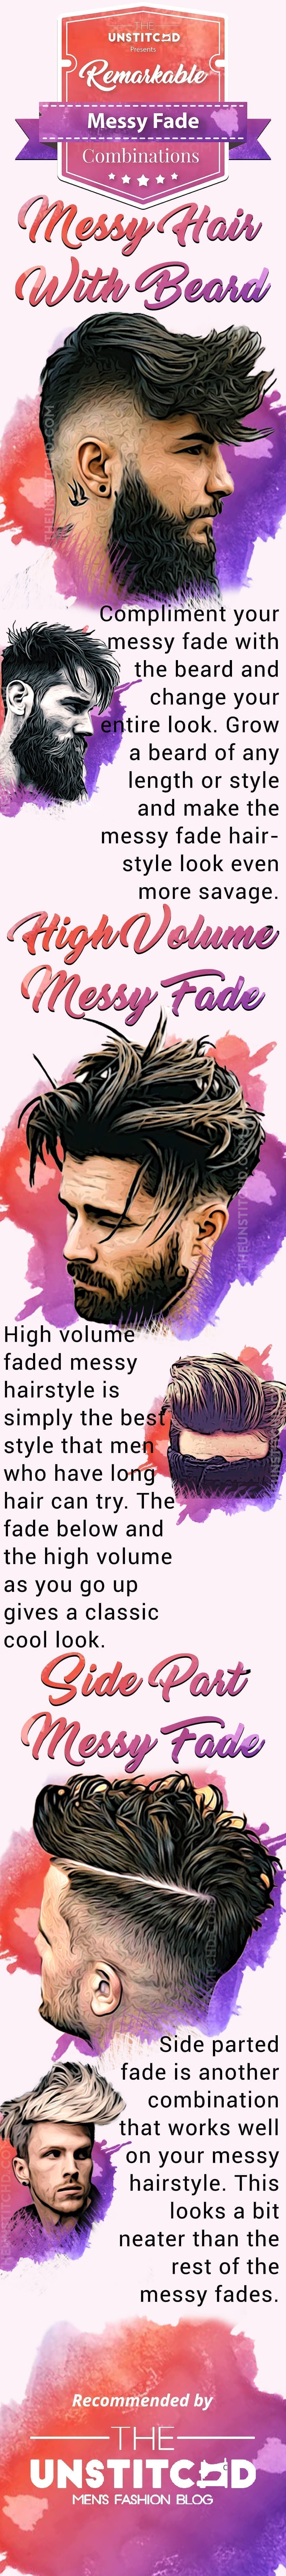 Messy-Hair-with-fade-hairstyle-info